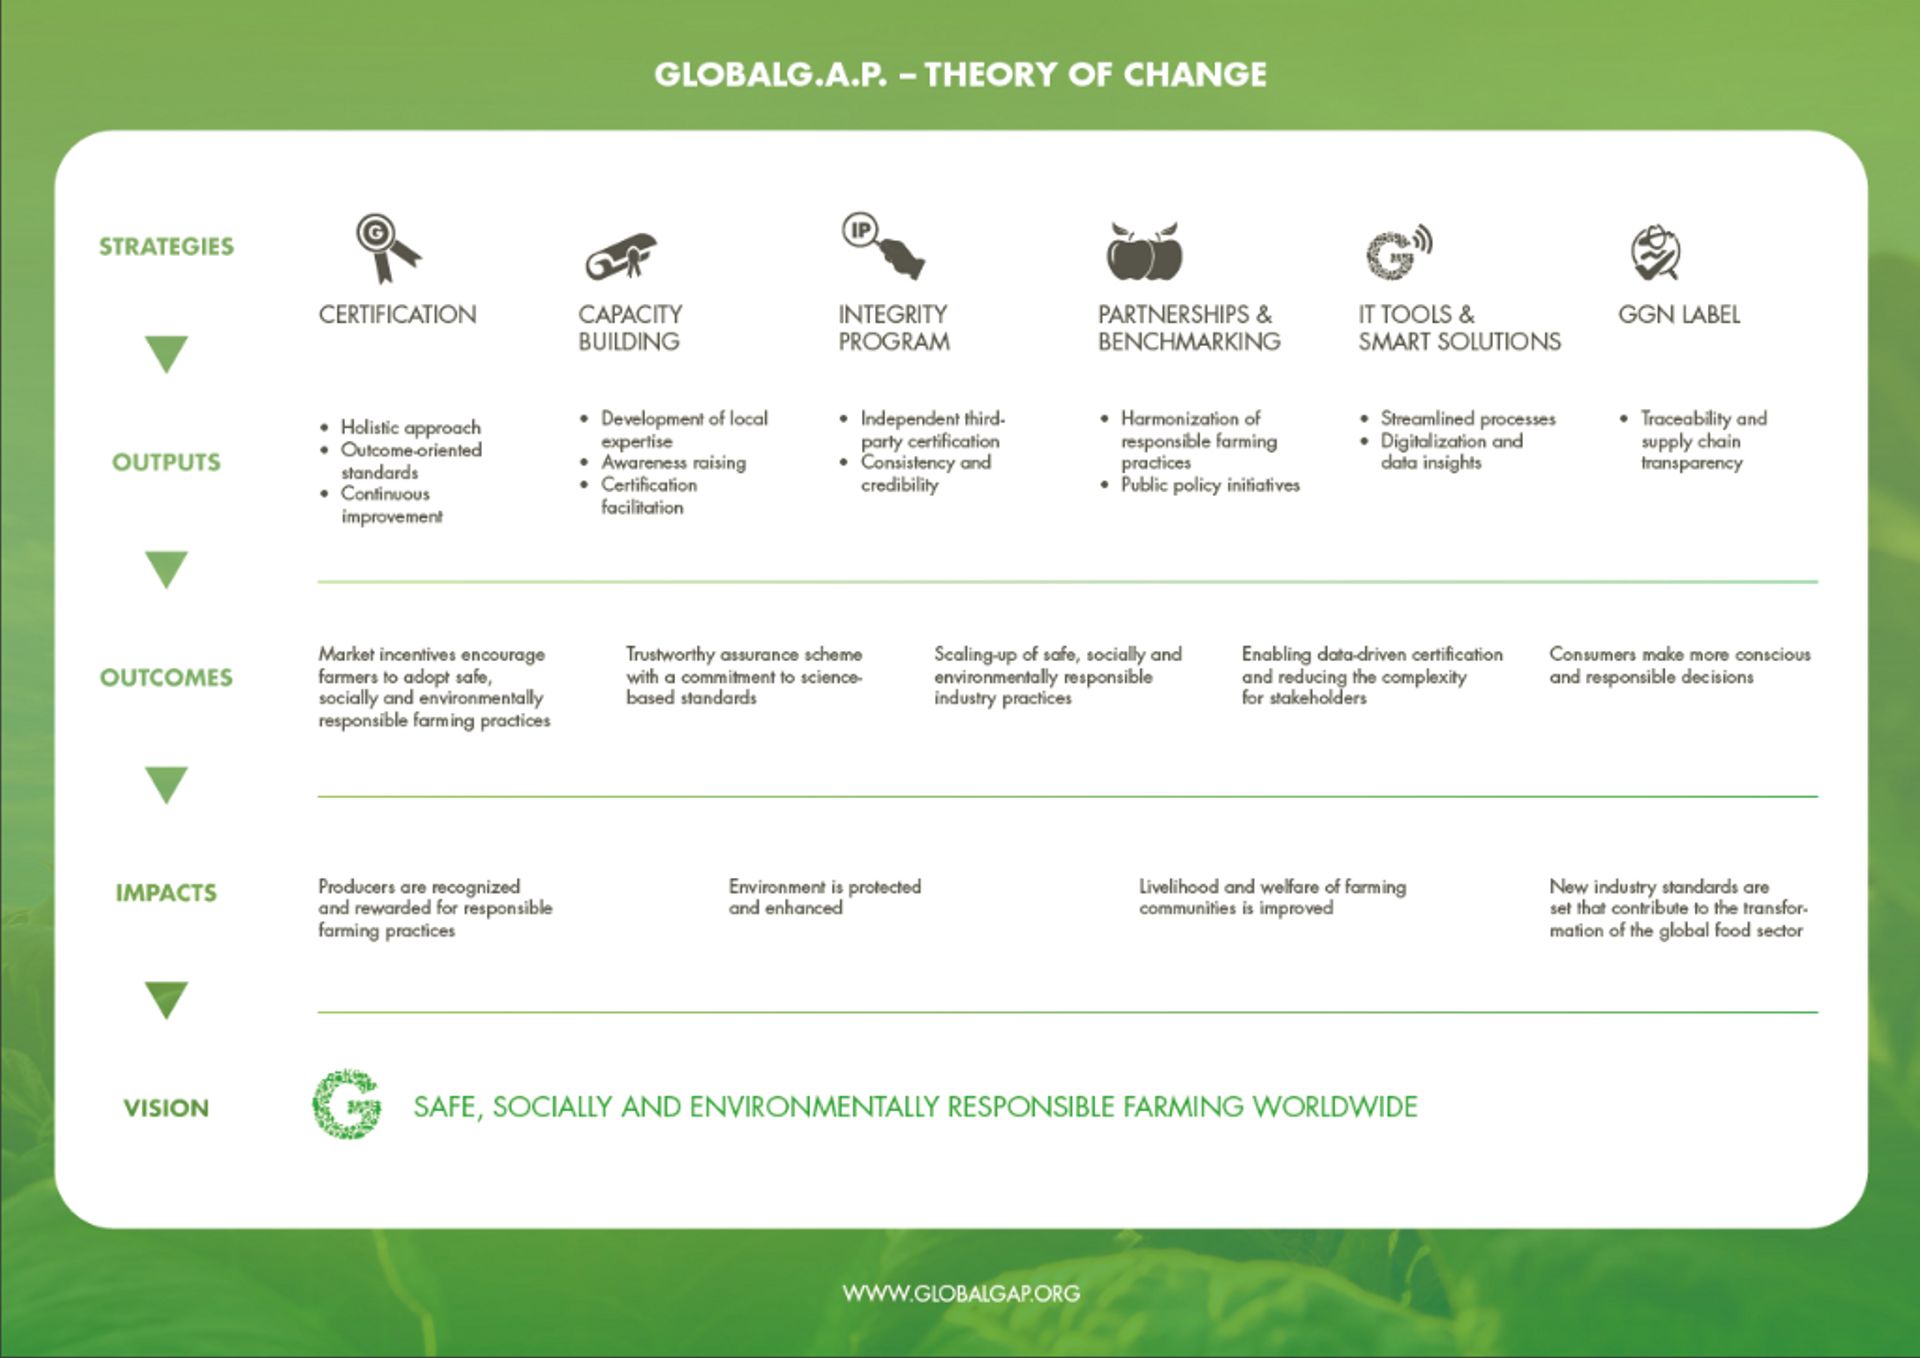 Infographic showing the GLOBALG.A.P. Theory of Change